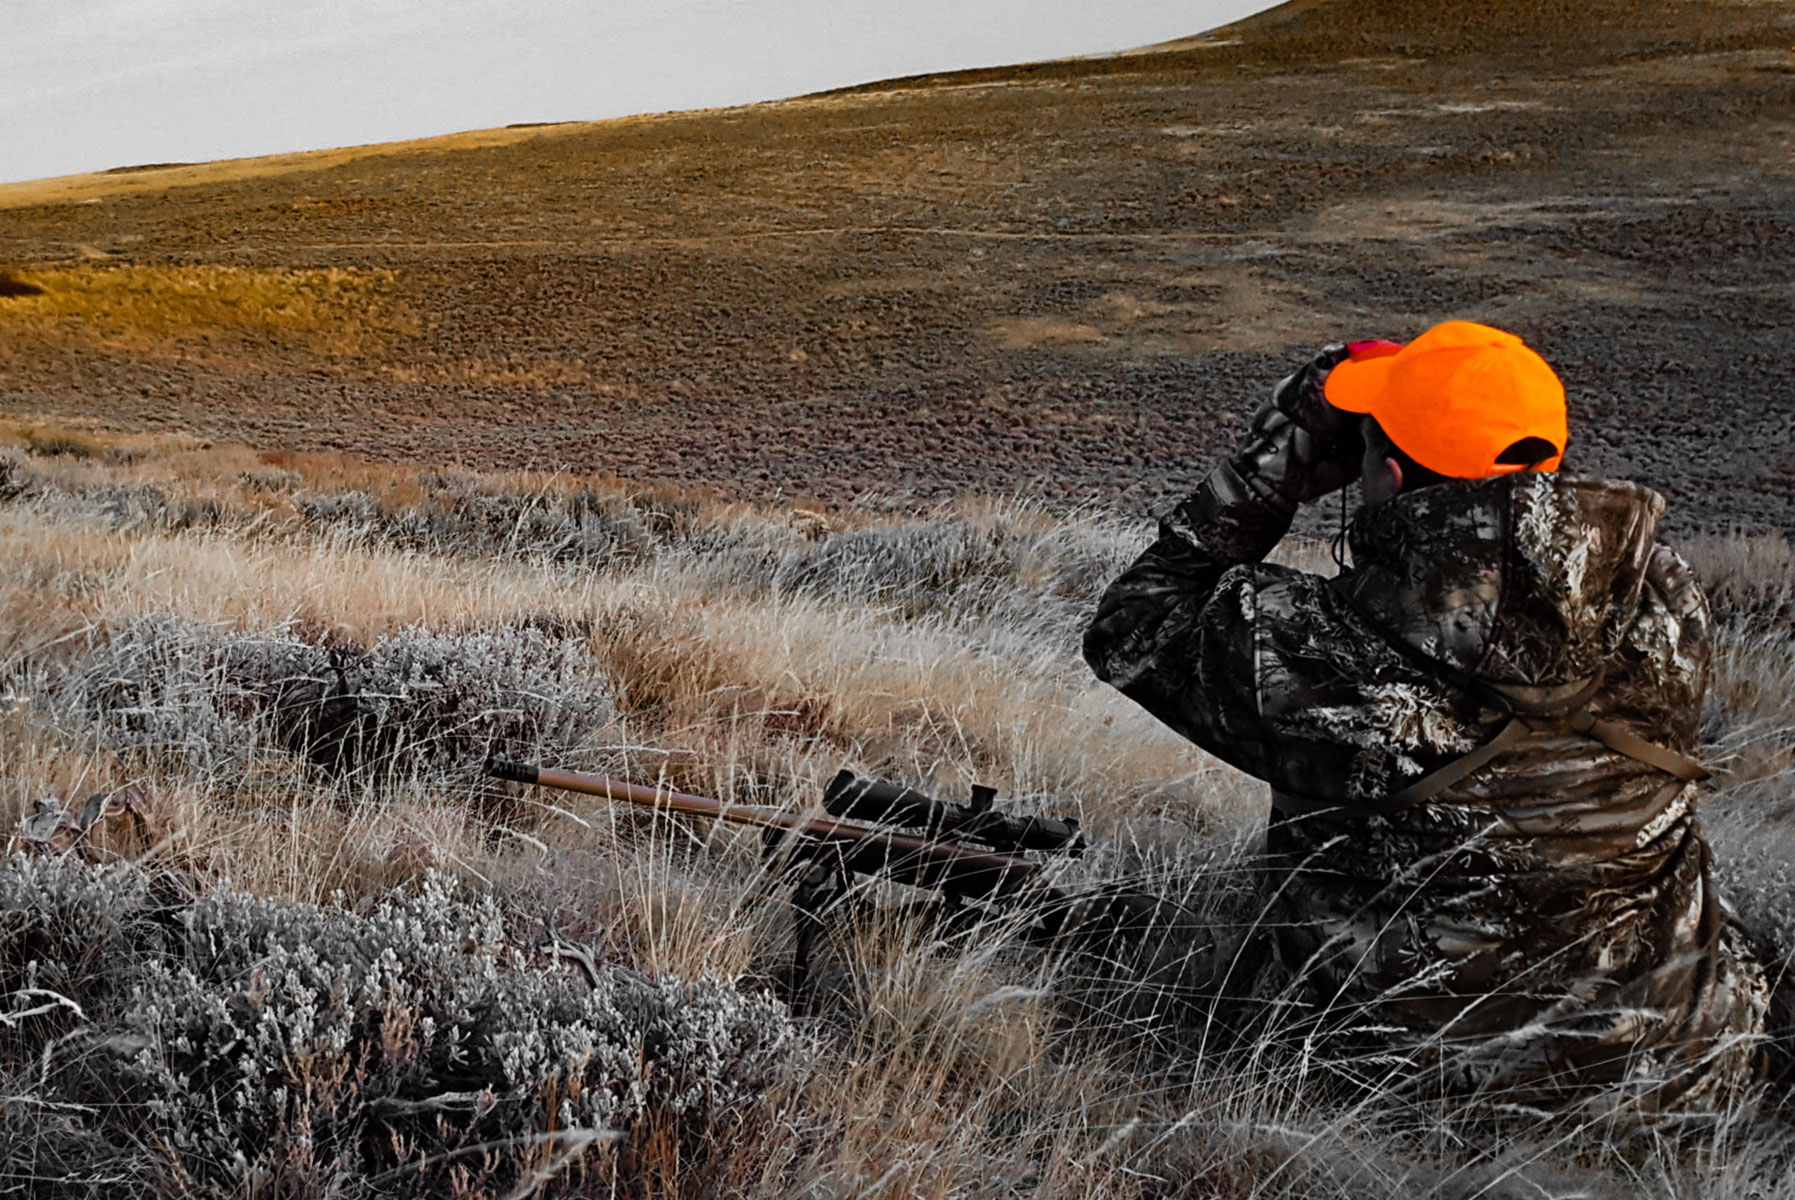 2020 Trends Affecting The Outdoor, Hunting And Shooting Sports Industry Marketing